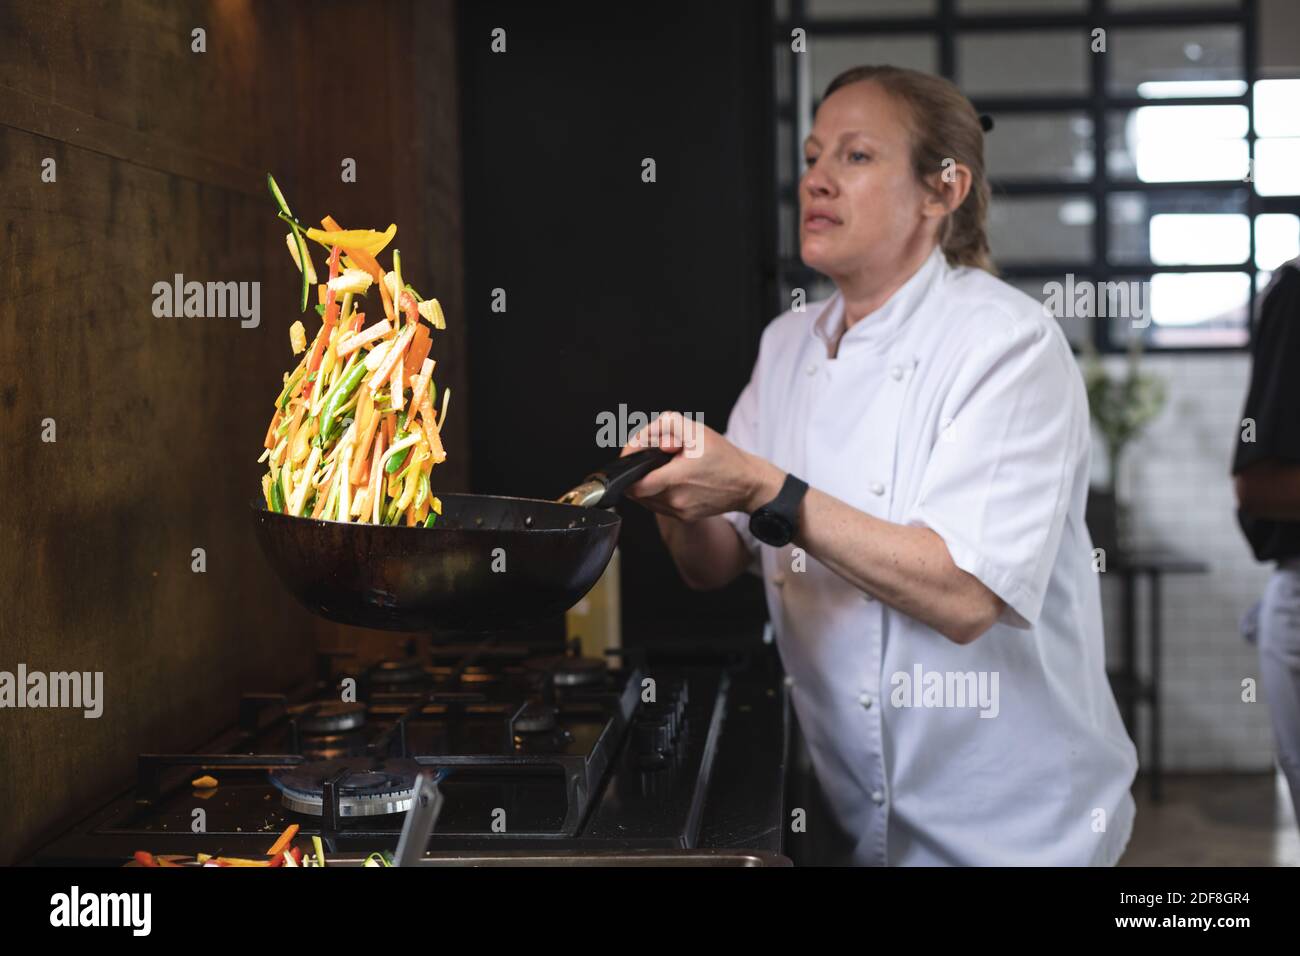 Caucasian female chef cooking in kitchen Stock Photo